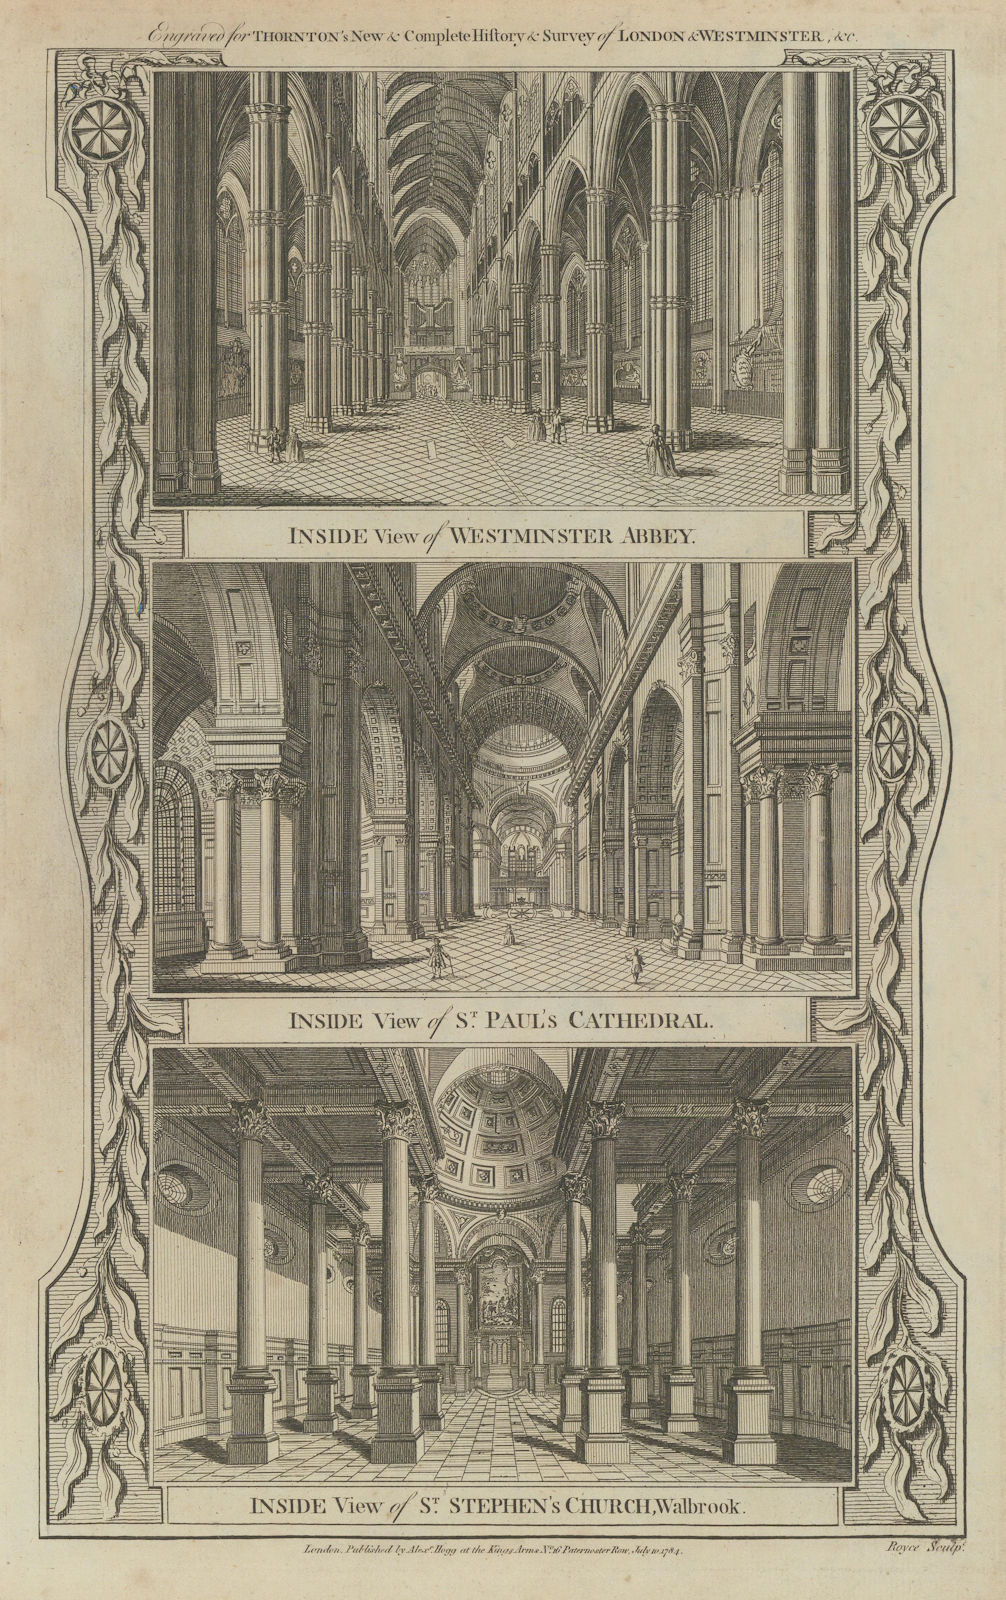 Associate Product Interiors of Westminster Abbey, St. Paul's Cathedral, St. Stephen Walbrook 1784